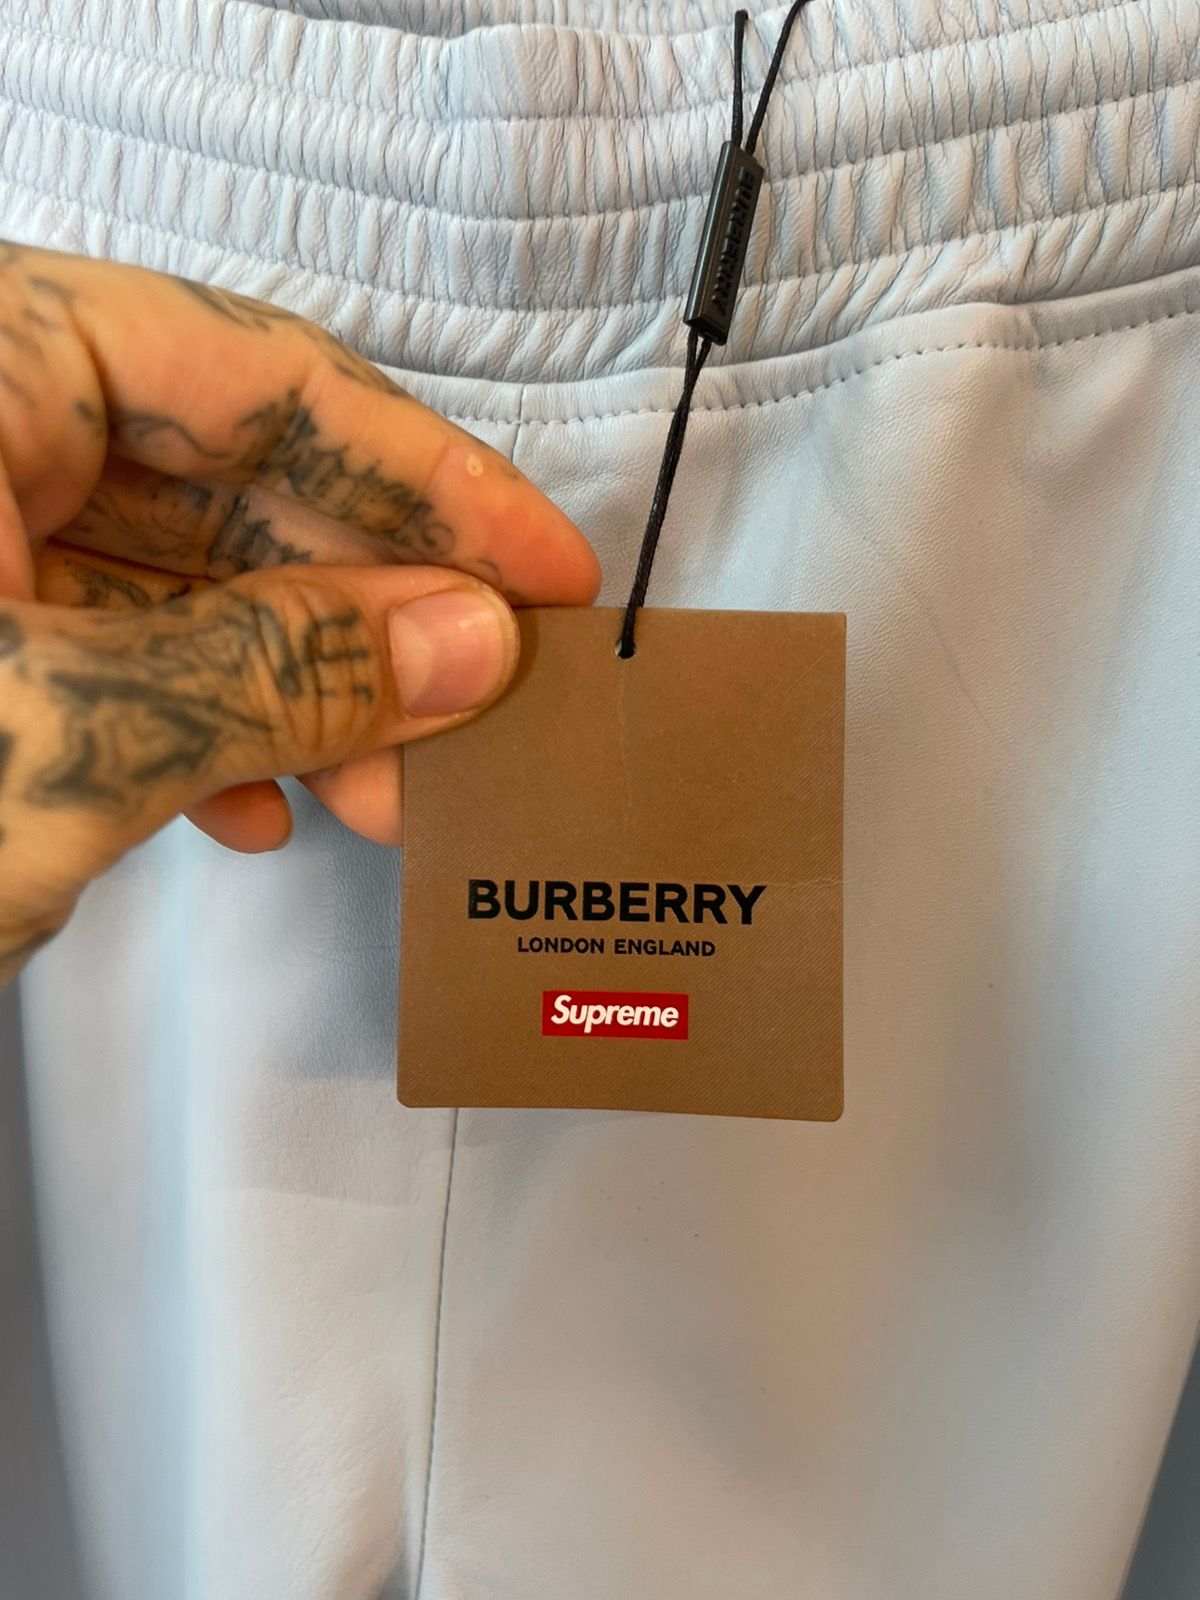 BURBERRY x SUPREME 100% LEATHER Jogger Track Pants NEW XL